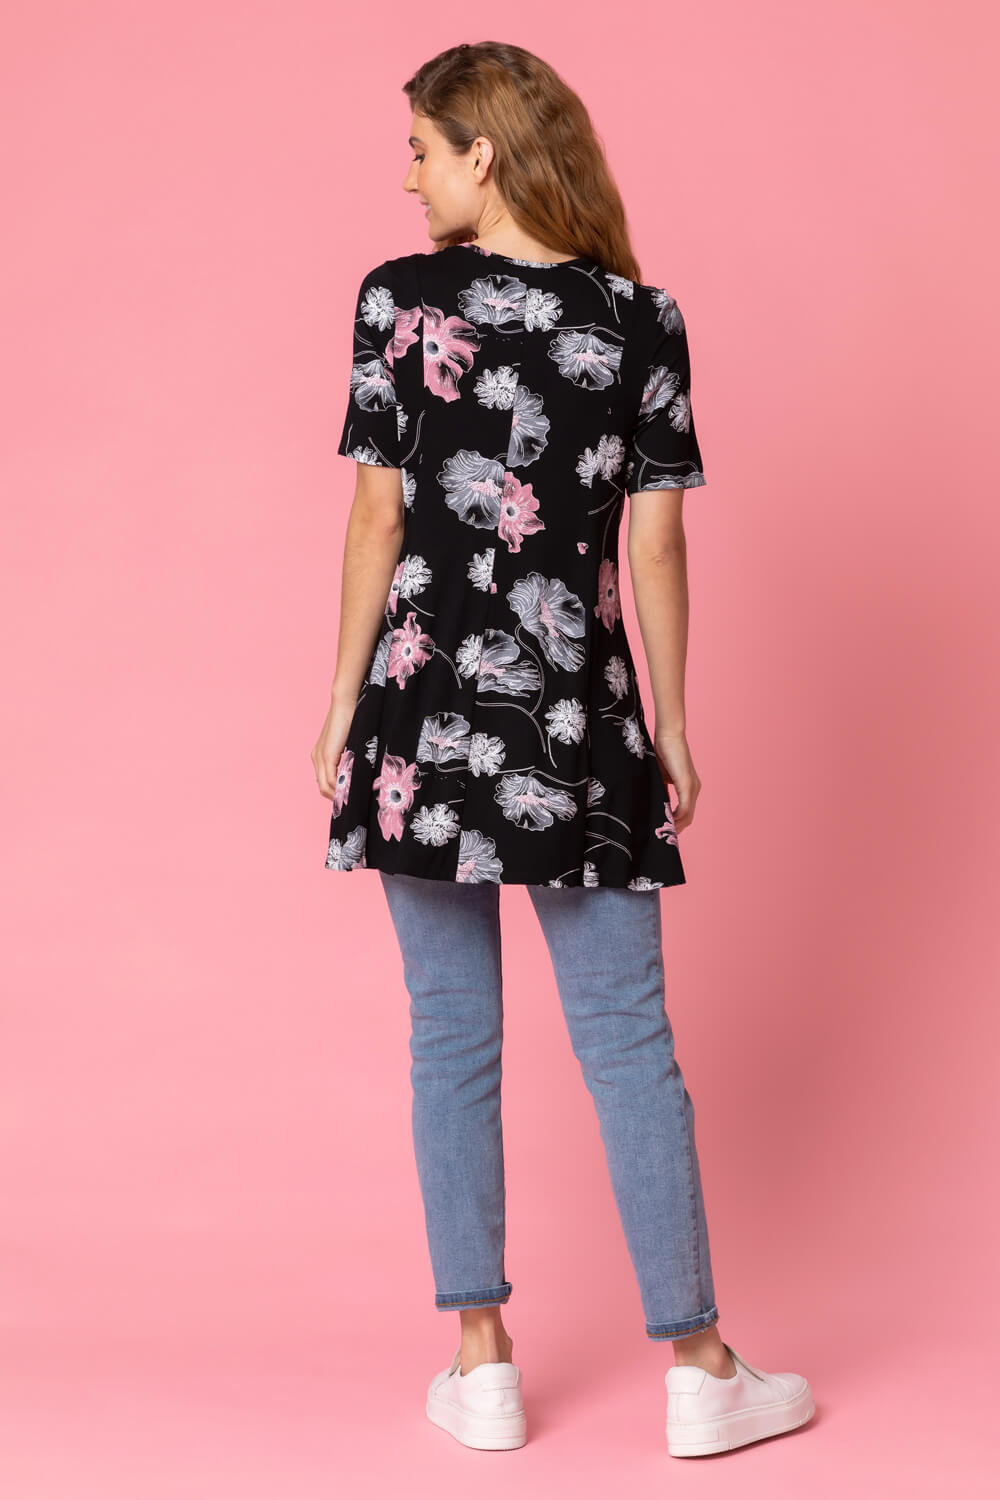 Black Floral Print Swing Tunic Top, Image 2 of 4